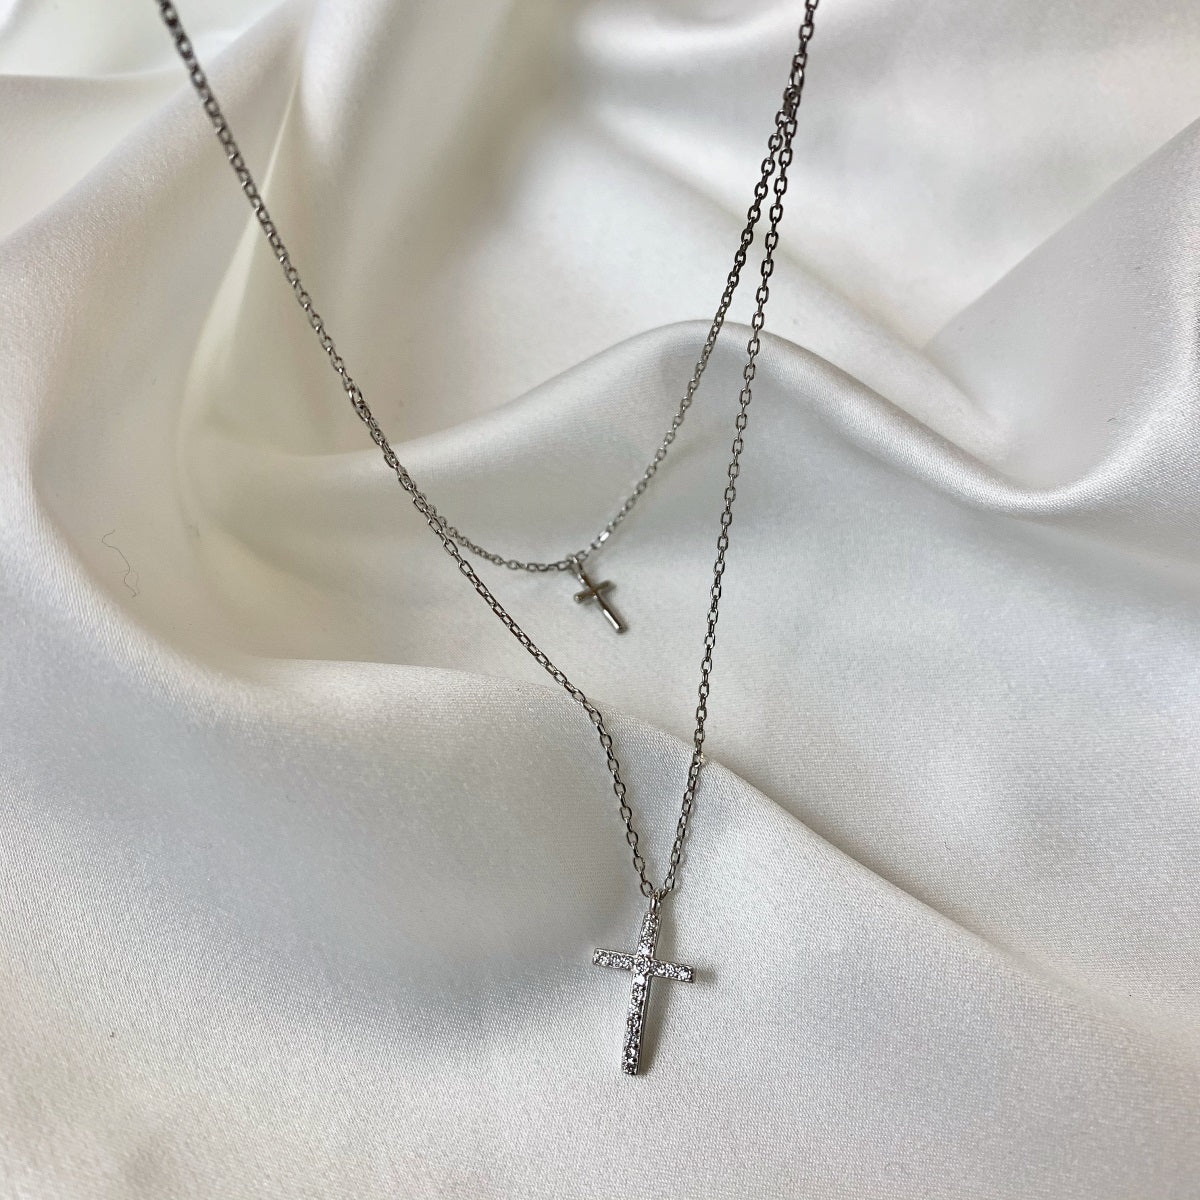 ENGRAVED DOUBLE CROSS NECKLACE - two made – Dirty Hands Jewelry